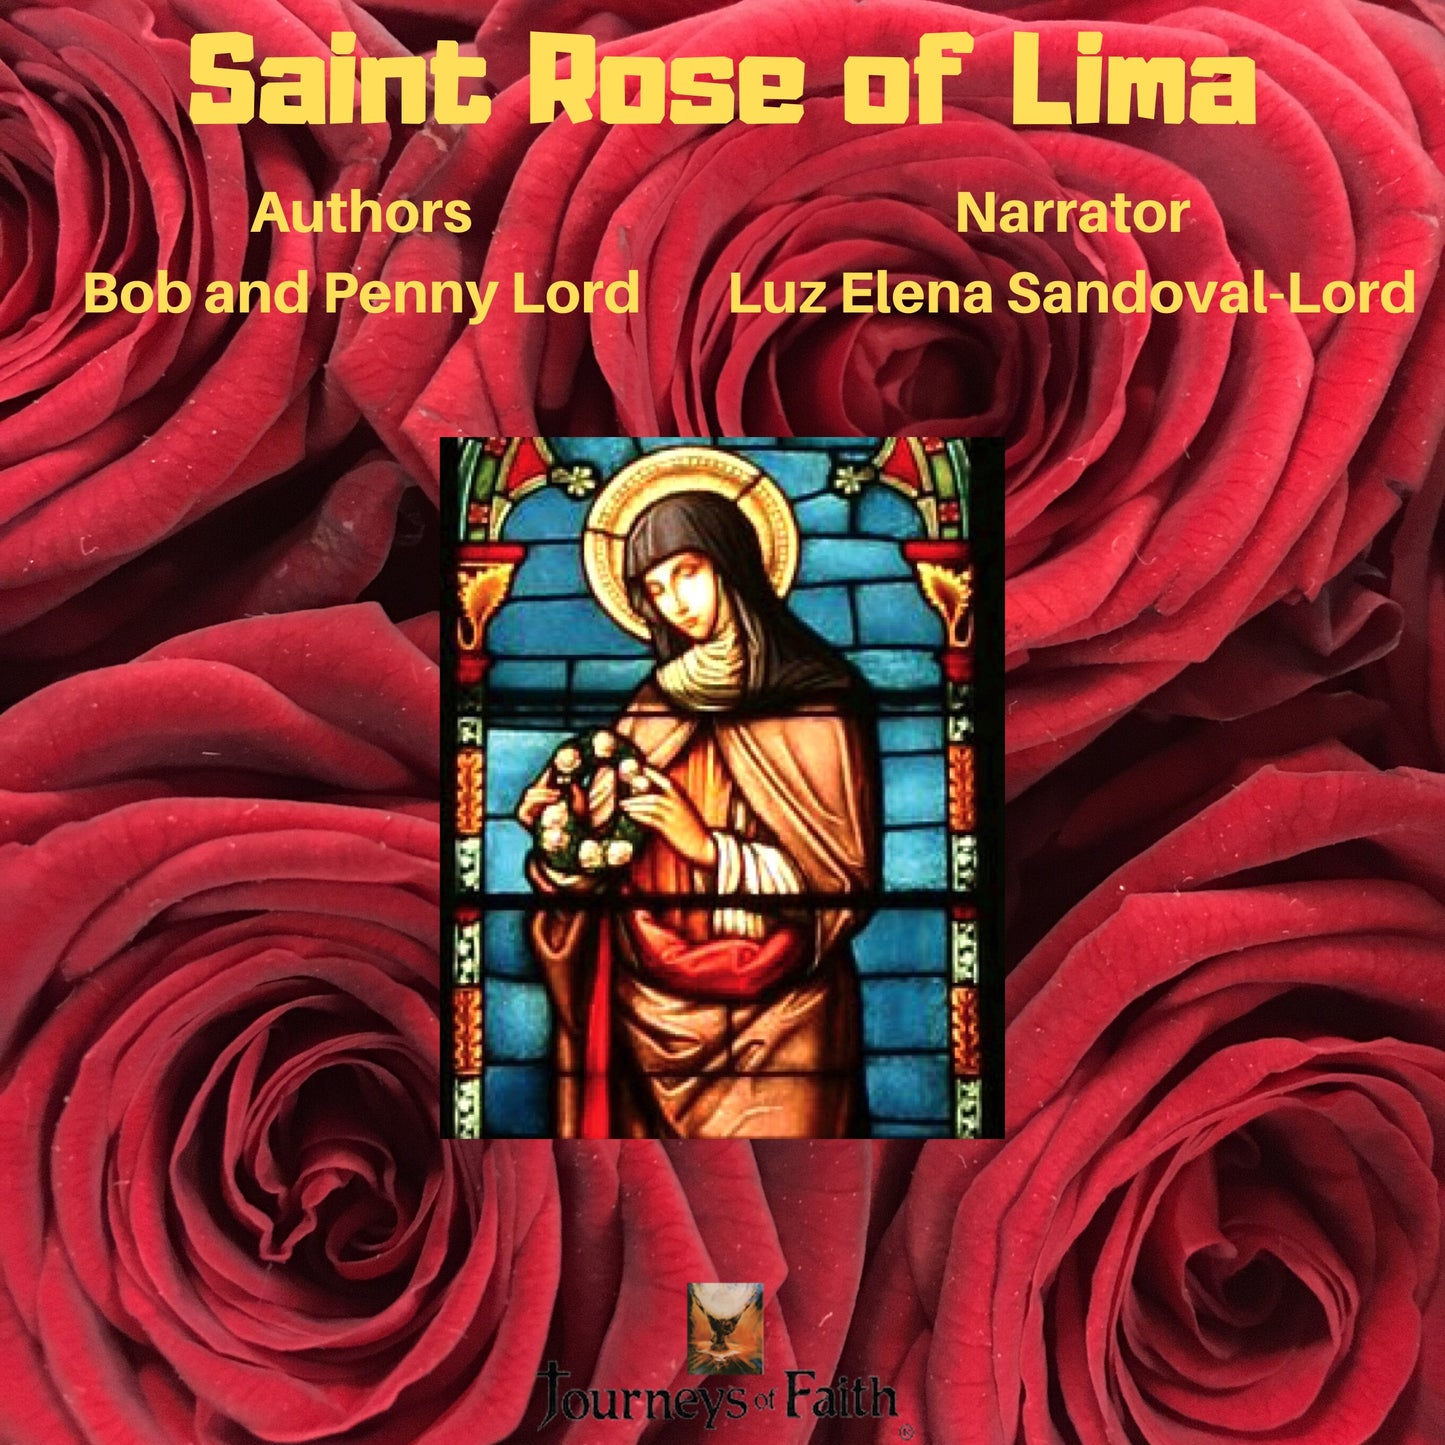 Saint Rose of Lima Audiobook - Bob and Penny Lord